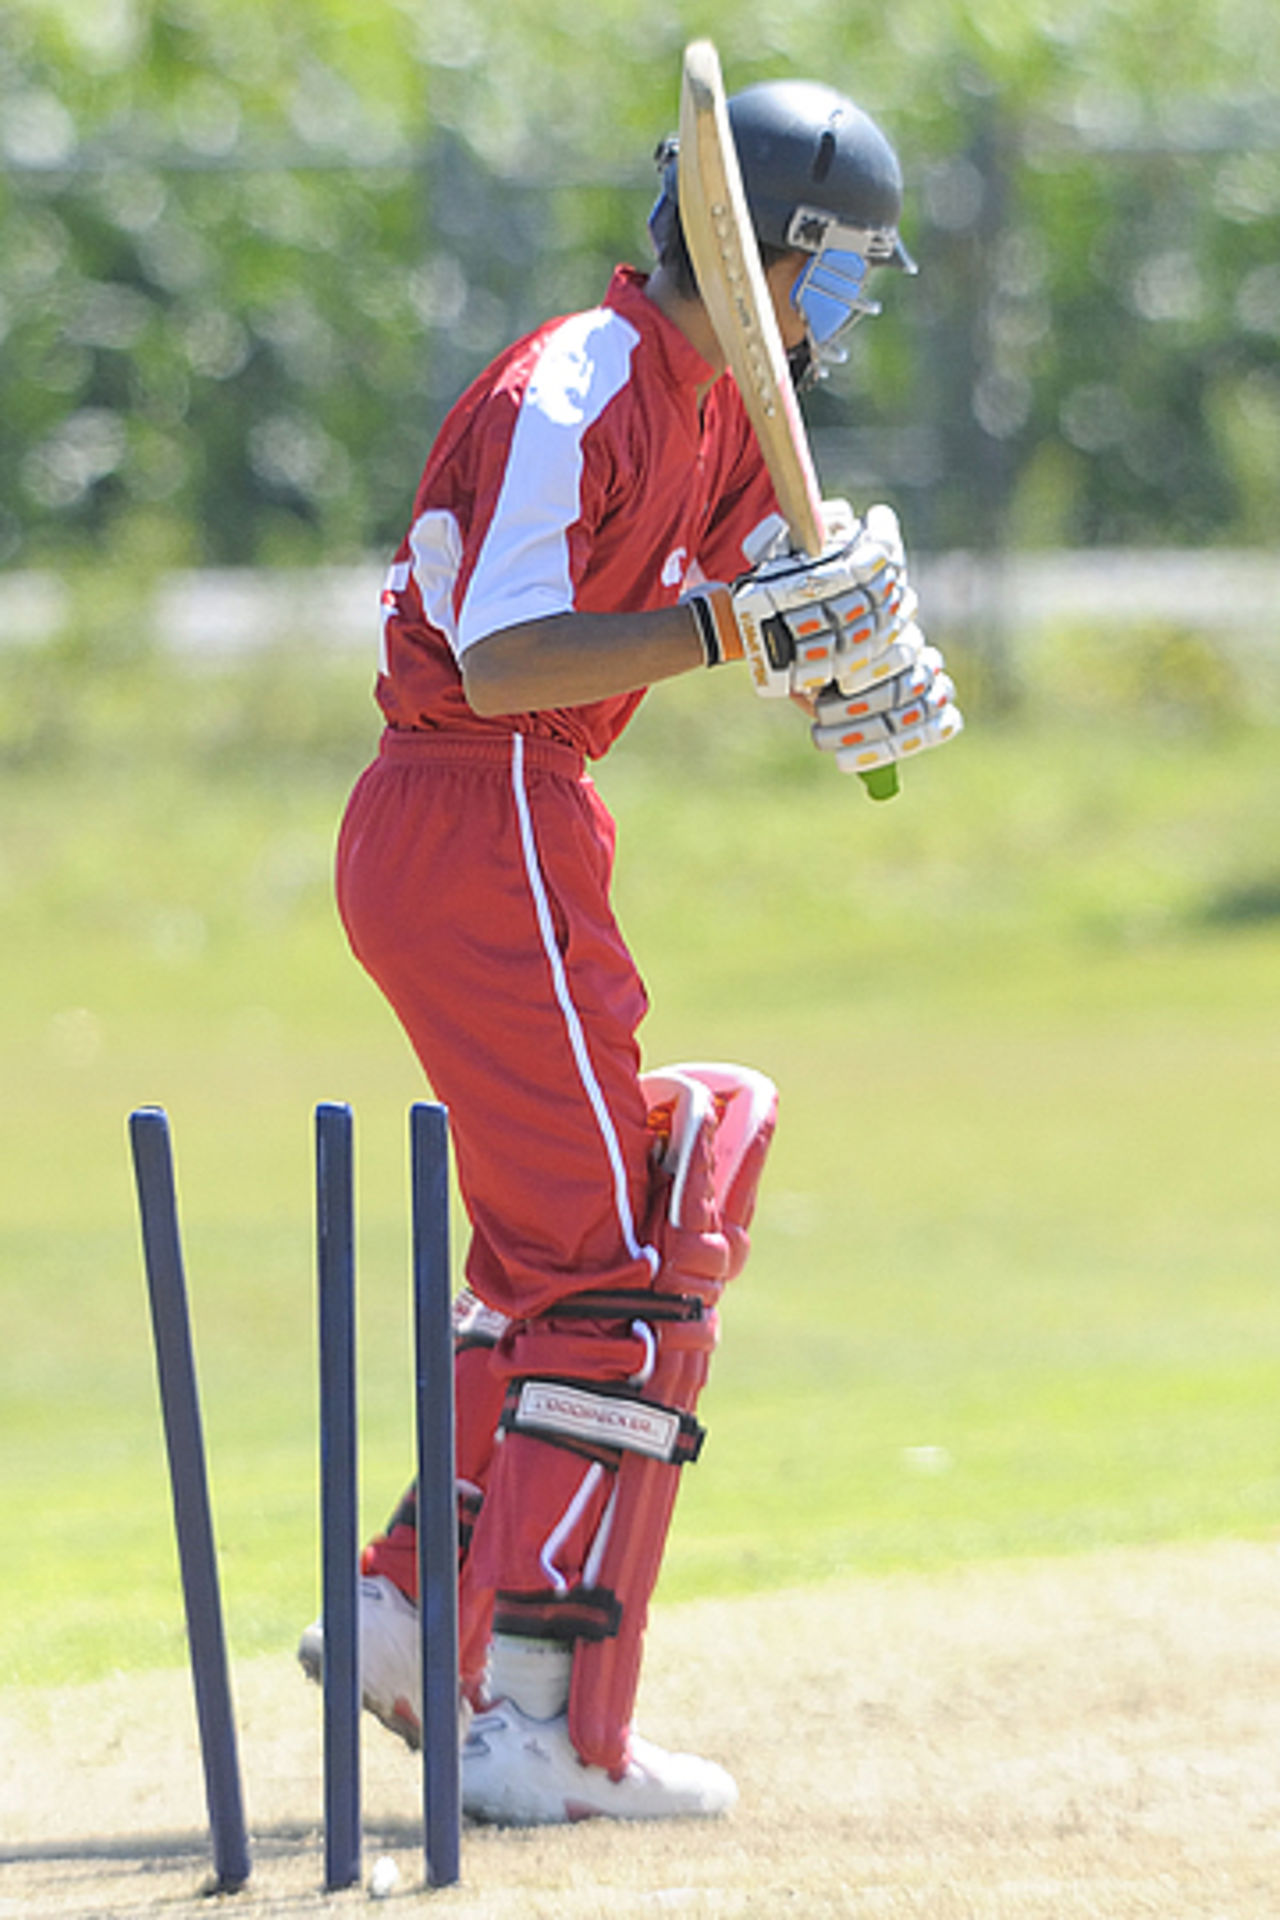 Asif Khan is bowled against PNG at the ICC Under-19 Cricket World Cup Qualifier